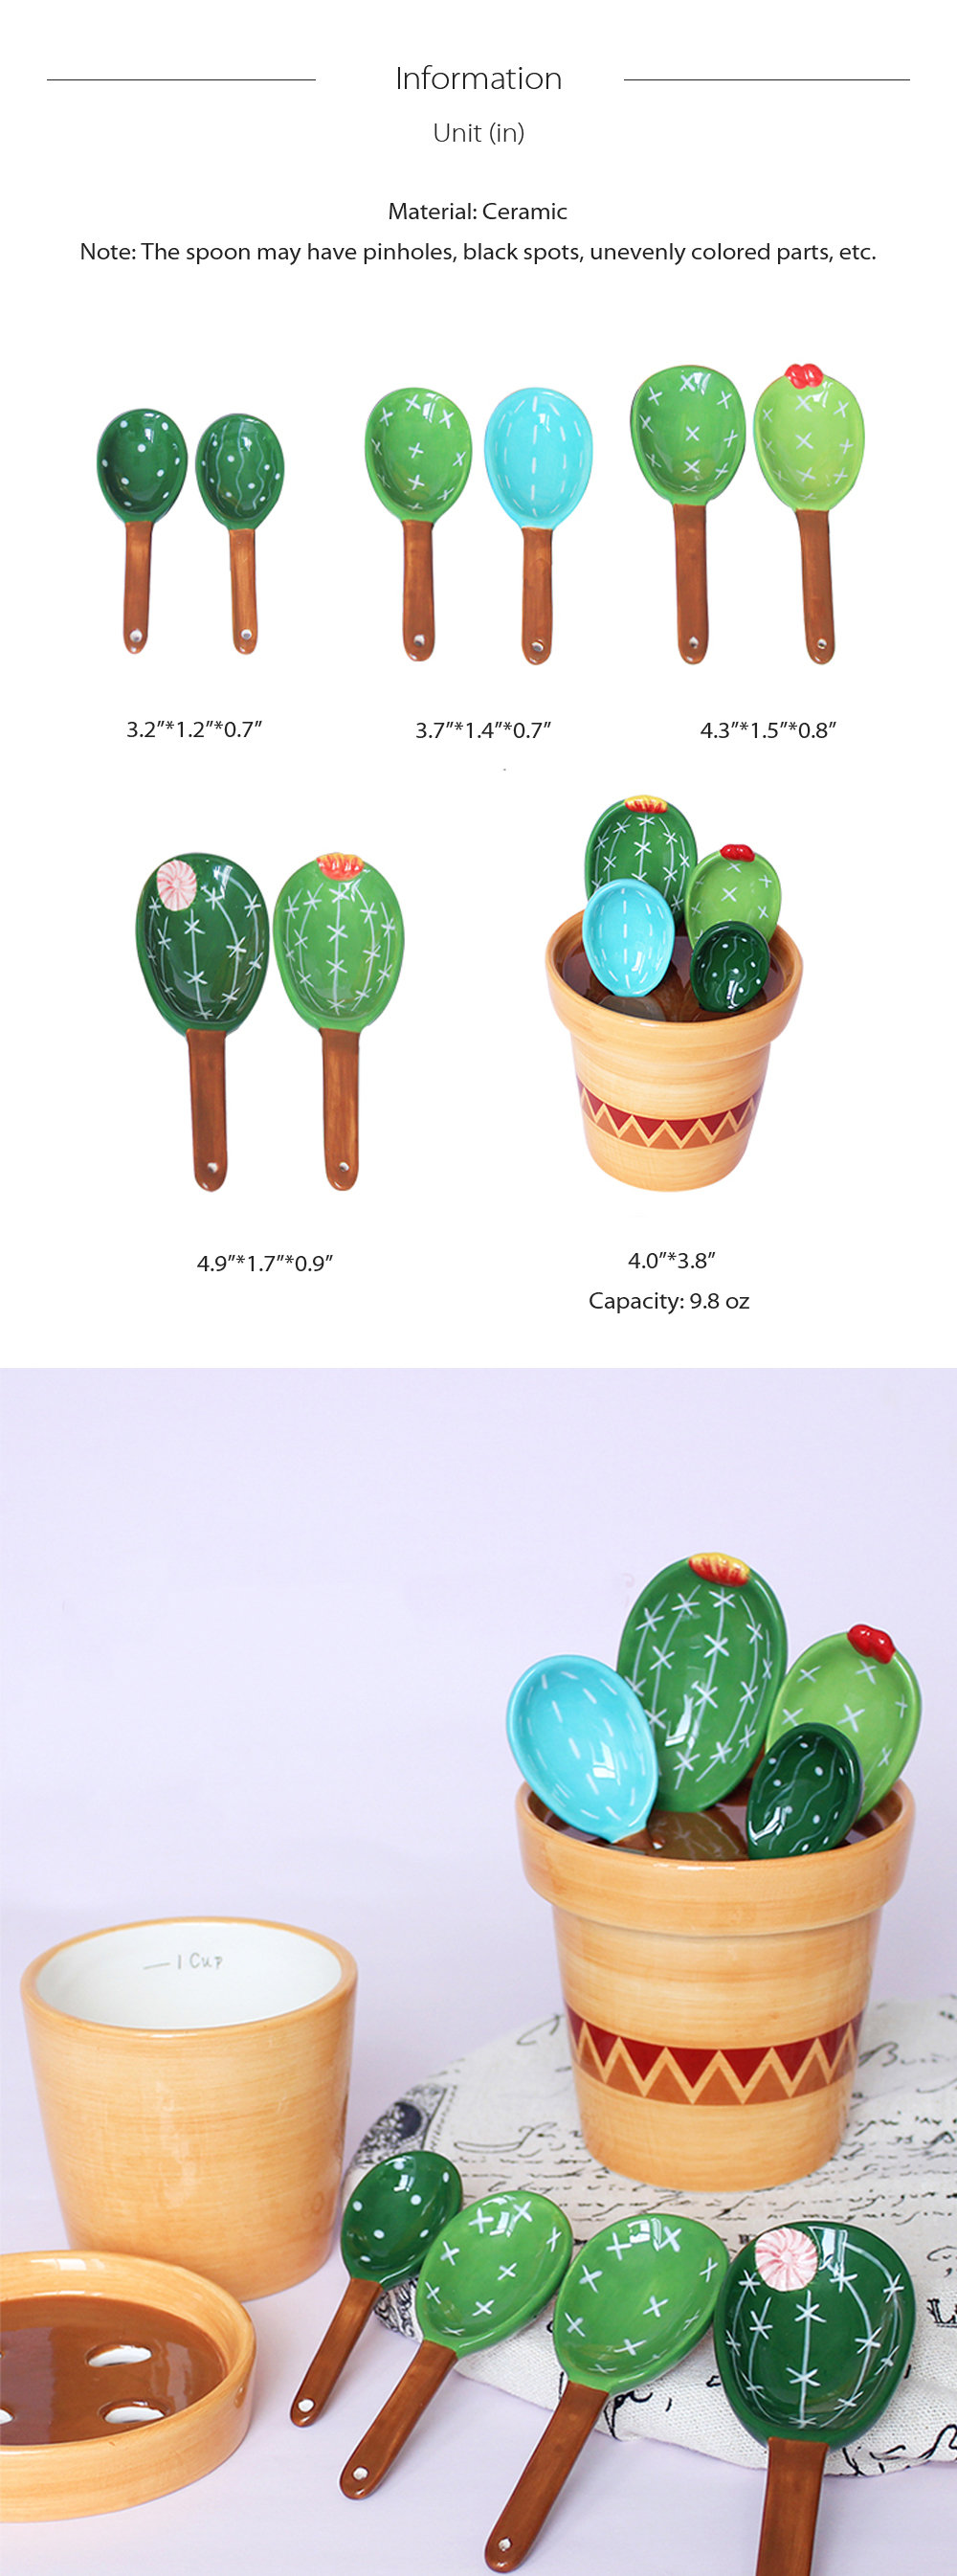 Ceramic Cactus Measuring Spoons and Cups, Cute Measuring Spoons Set in Pot,  Cactus Shape Kitchen Decor Small Measuring Spoons (Colorful)